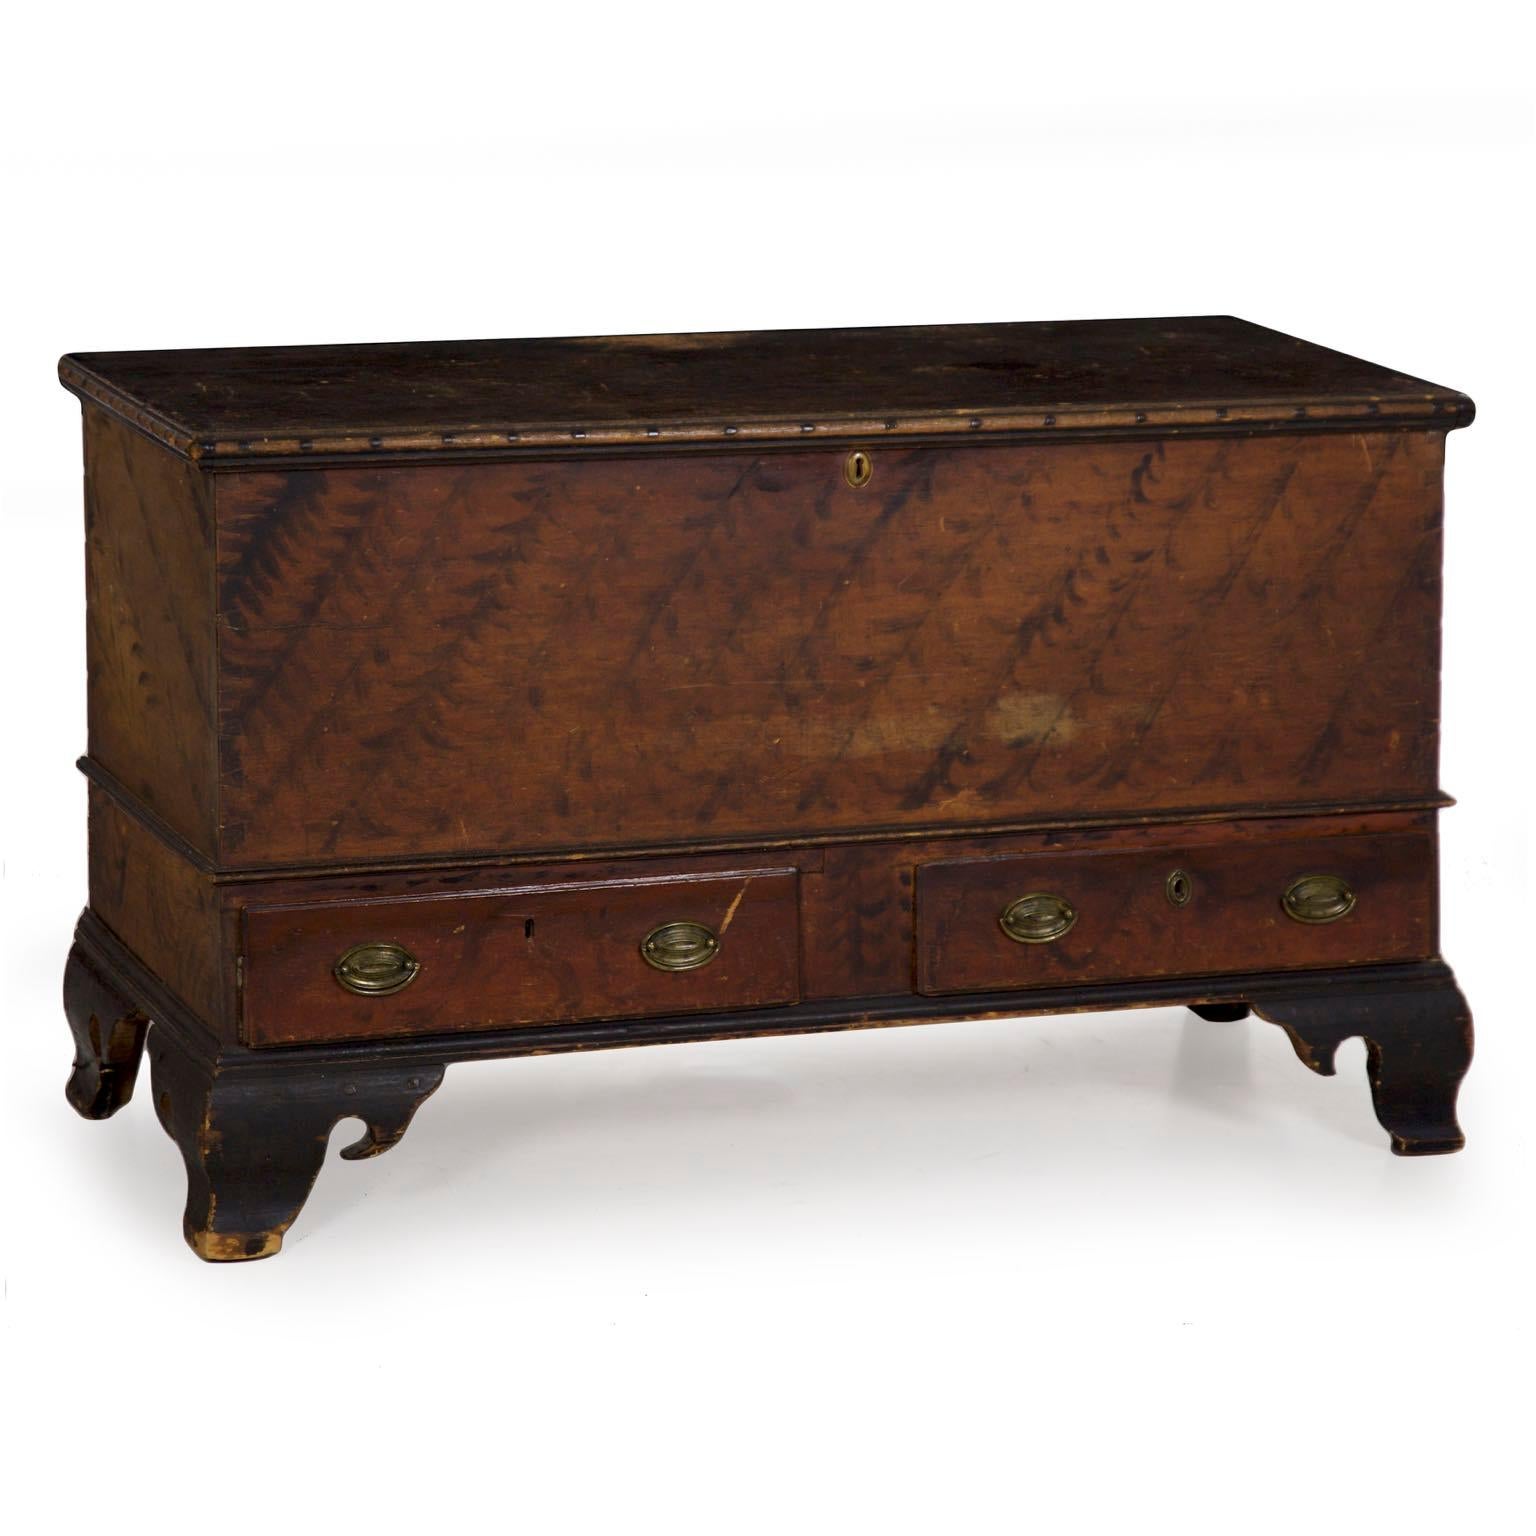 A well preserved dower chest from the first quarter of the 19th century, the beautifully oxidized painted finish is original throughout over the pine primary woods. Yellow pine is used almost exclusively throughout the case, the only notable